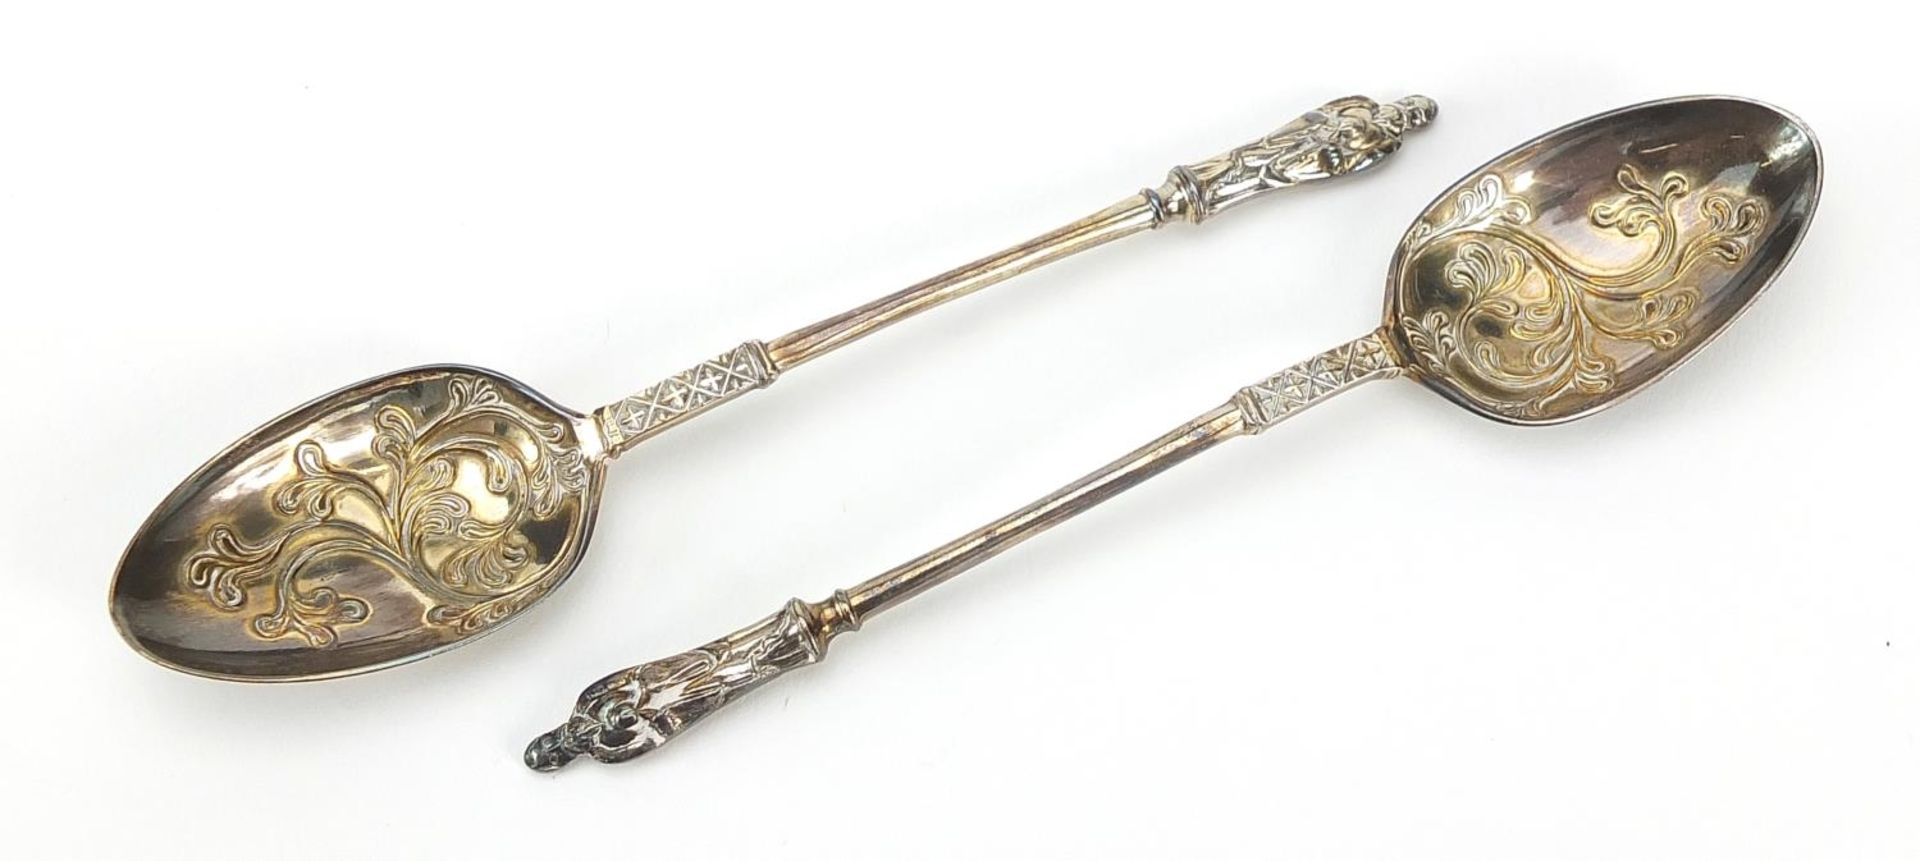 Mappin & Webb, set of six Edwardian silver apostle teaspoons and sugar tongs housed in a velvet - Image 3 of 6